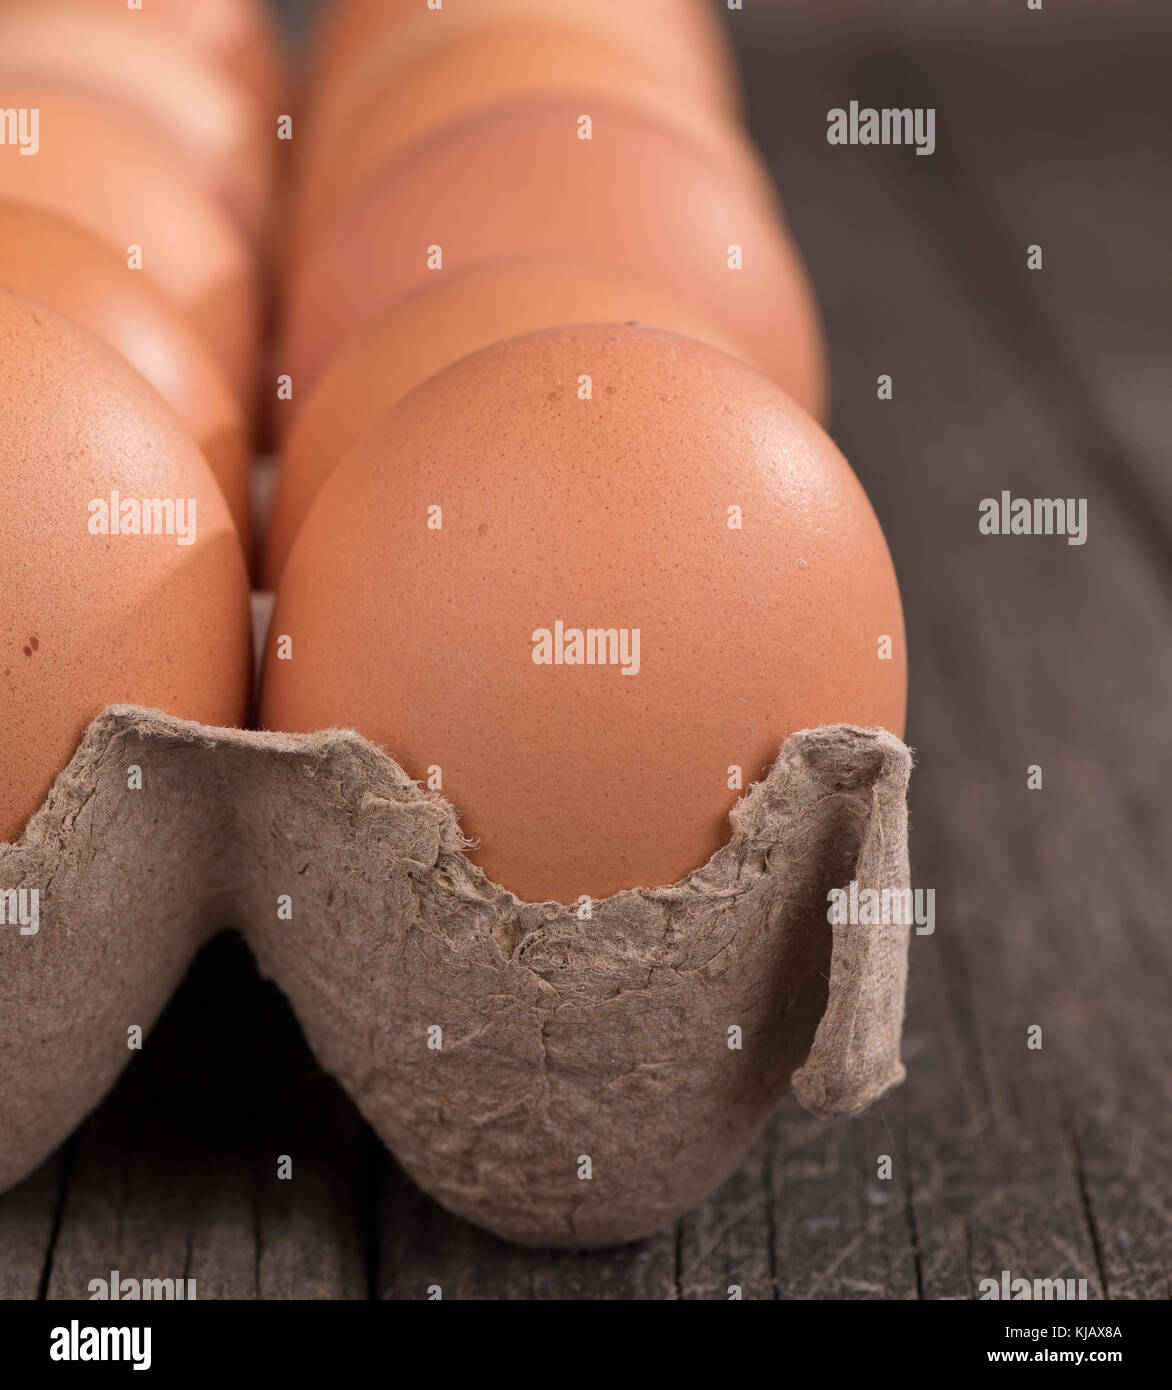 Closeup of brown eggs in a carton on a wood surface Stock Photo